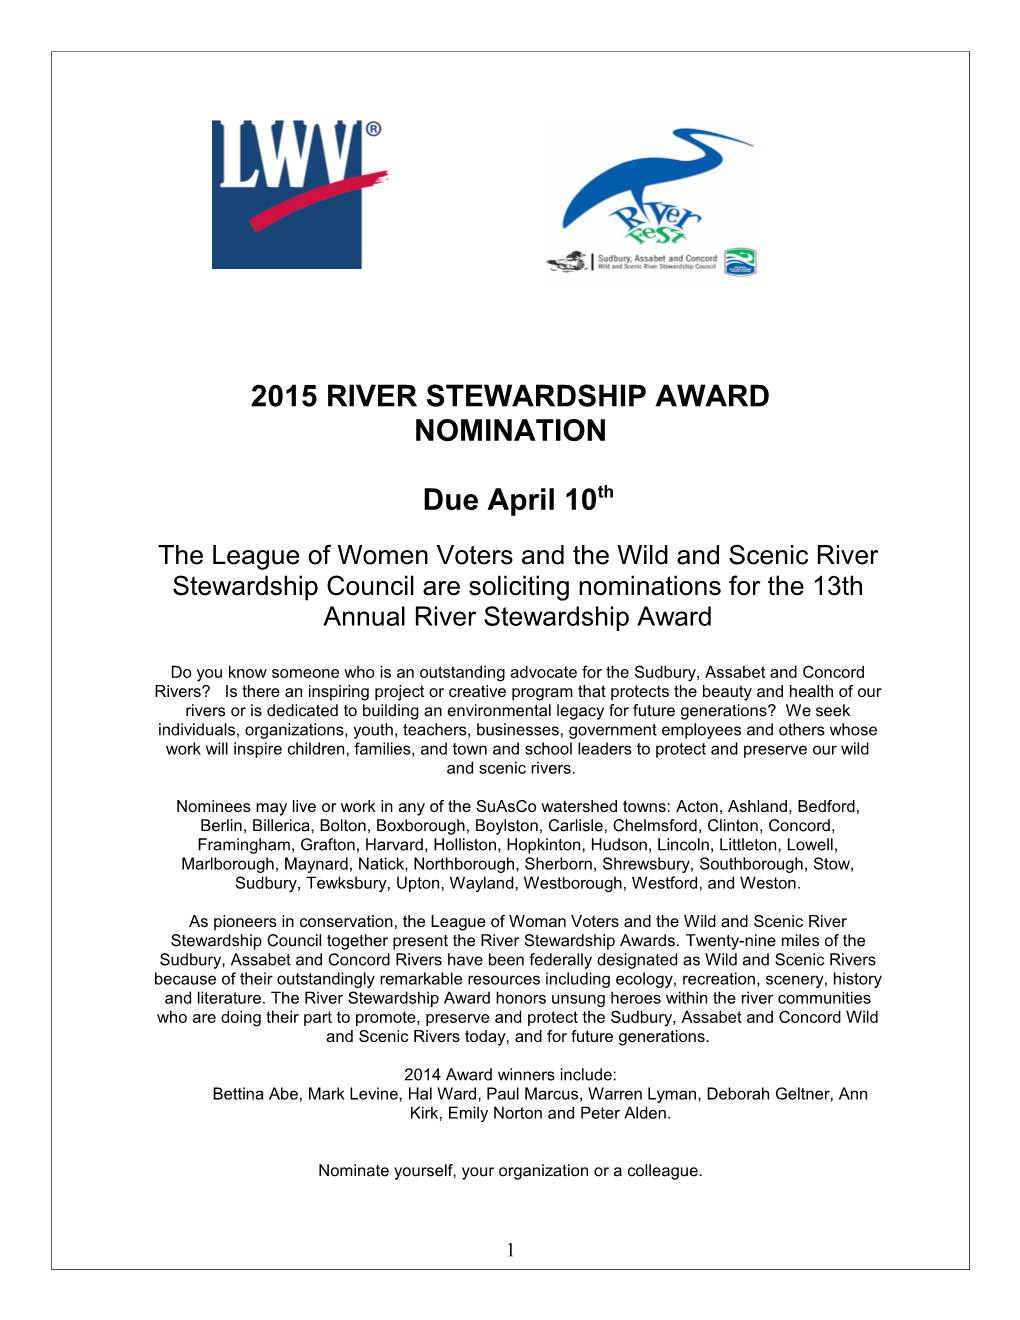 The League of Women Voters and the Wild and Scenic River Stewardship Council